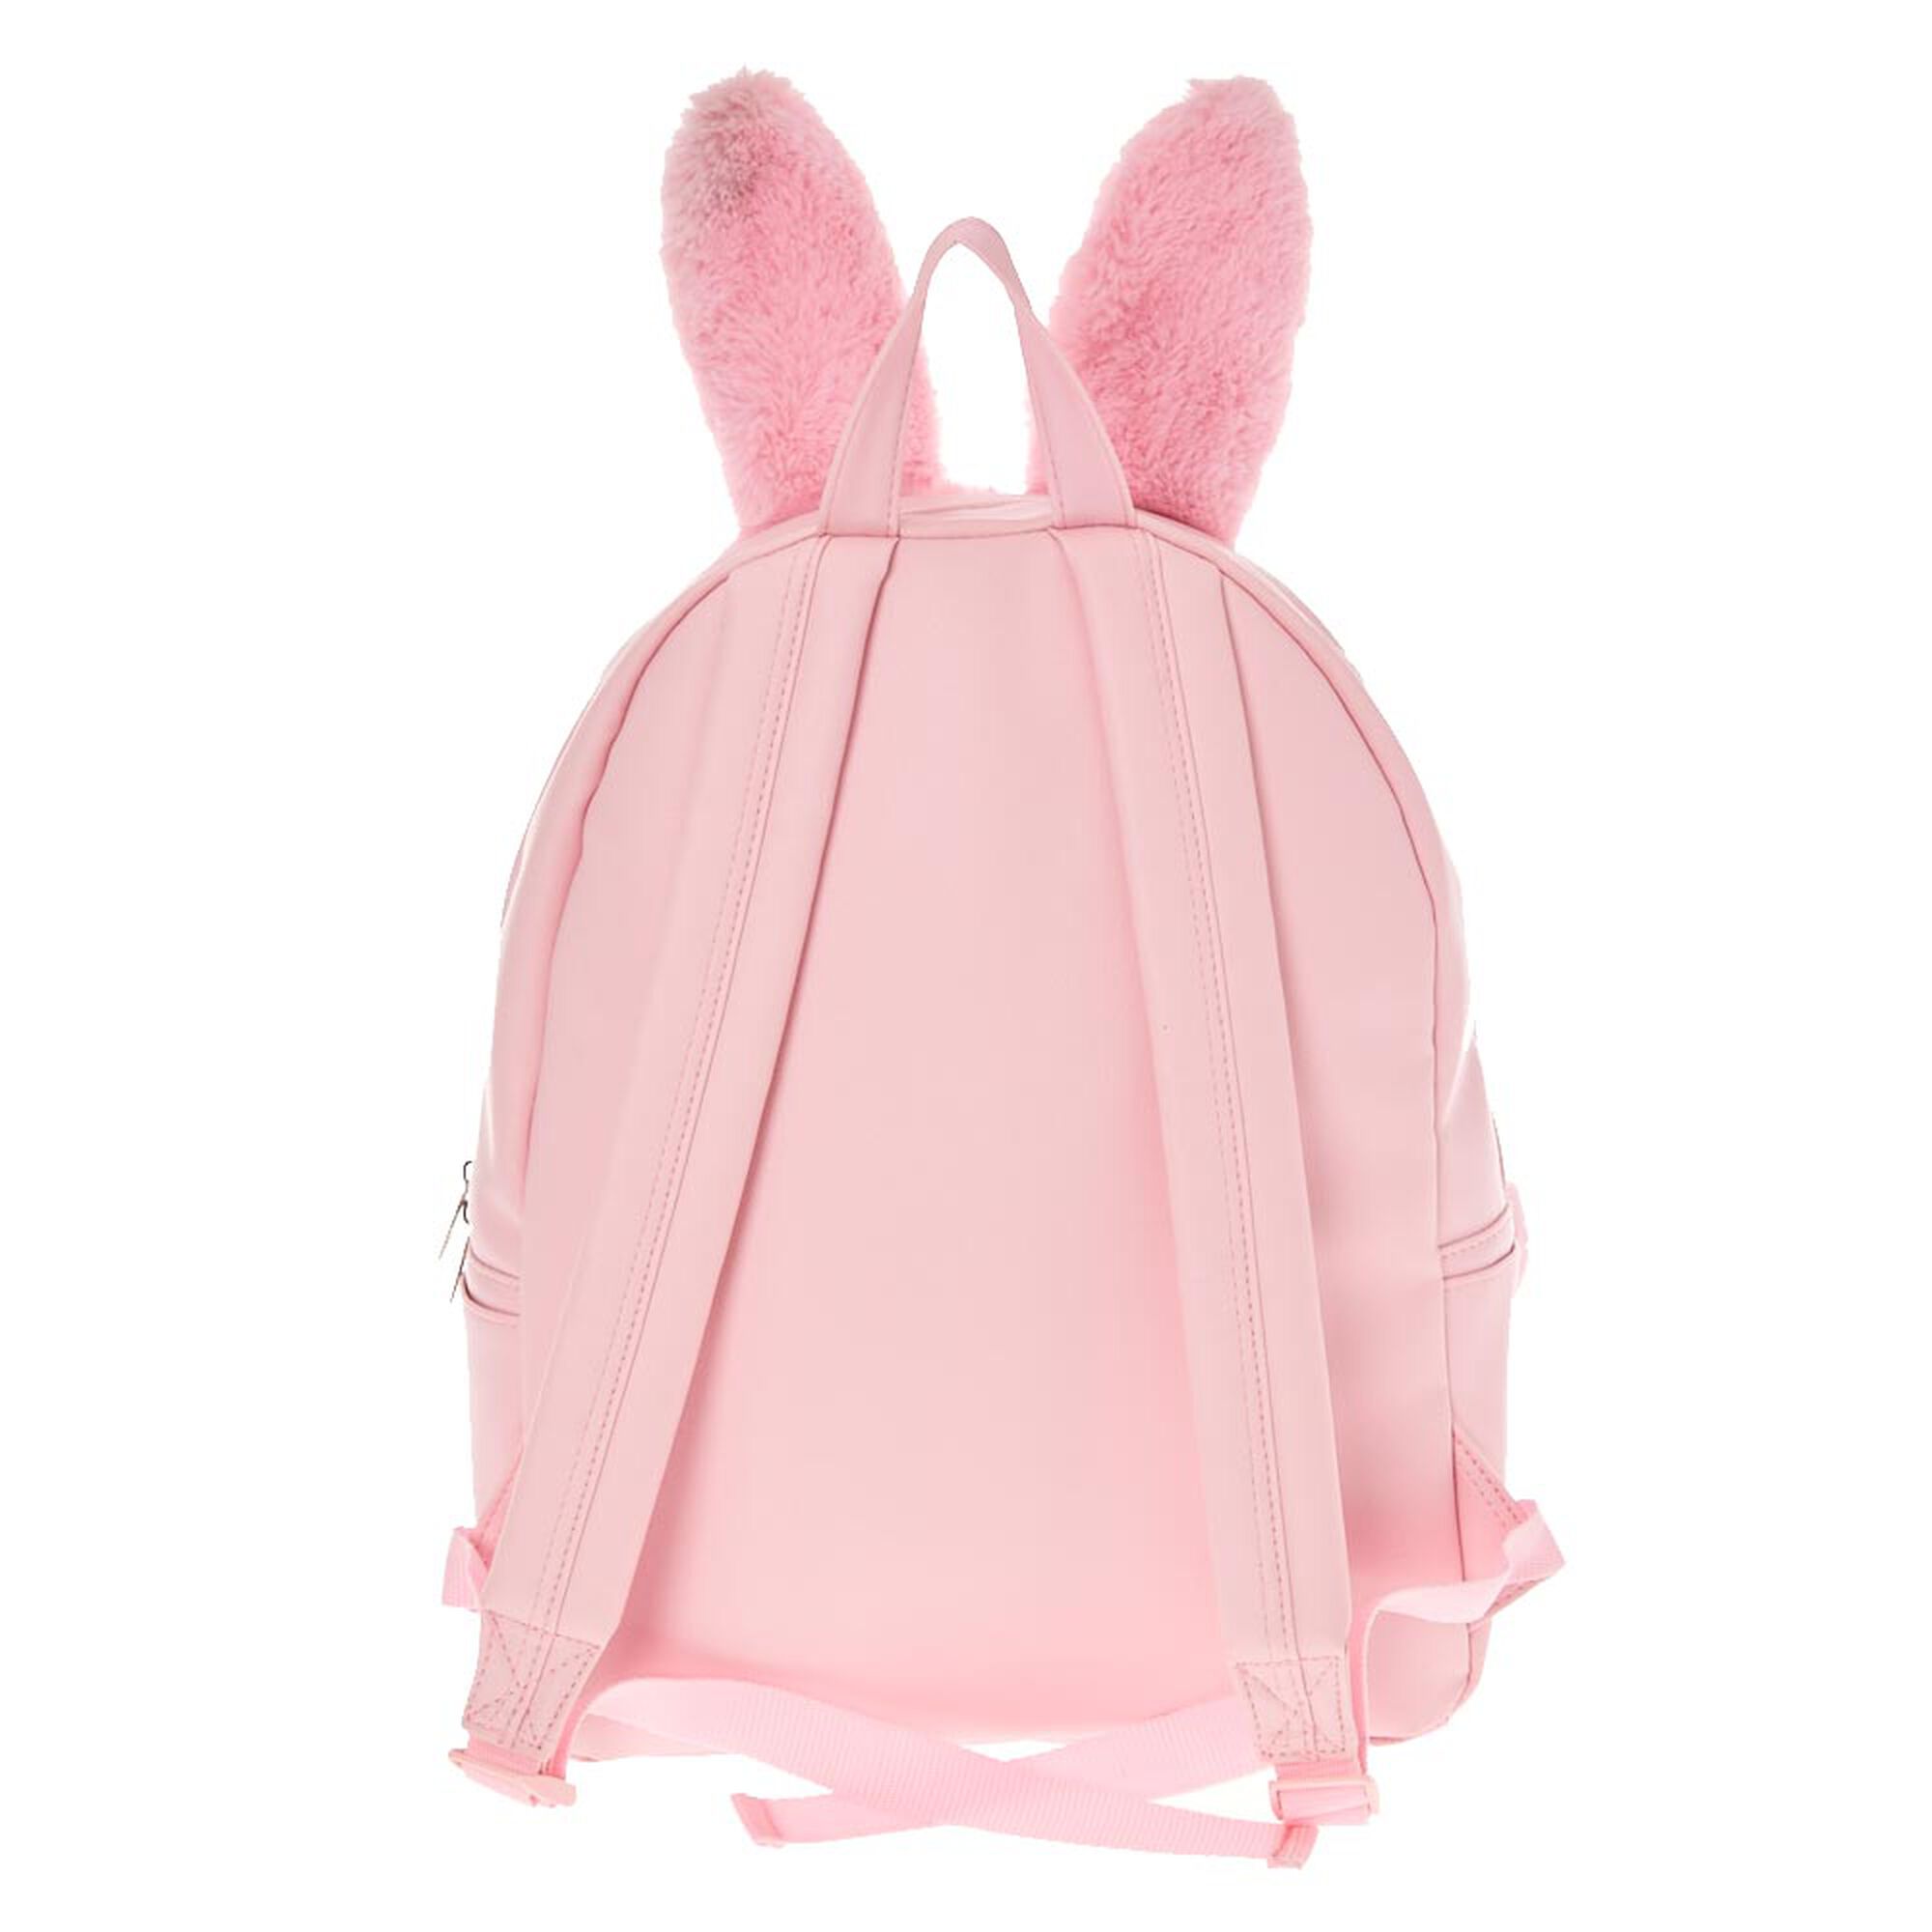 Furry Pink Bunny Backpack | Claire's US